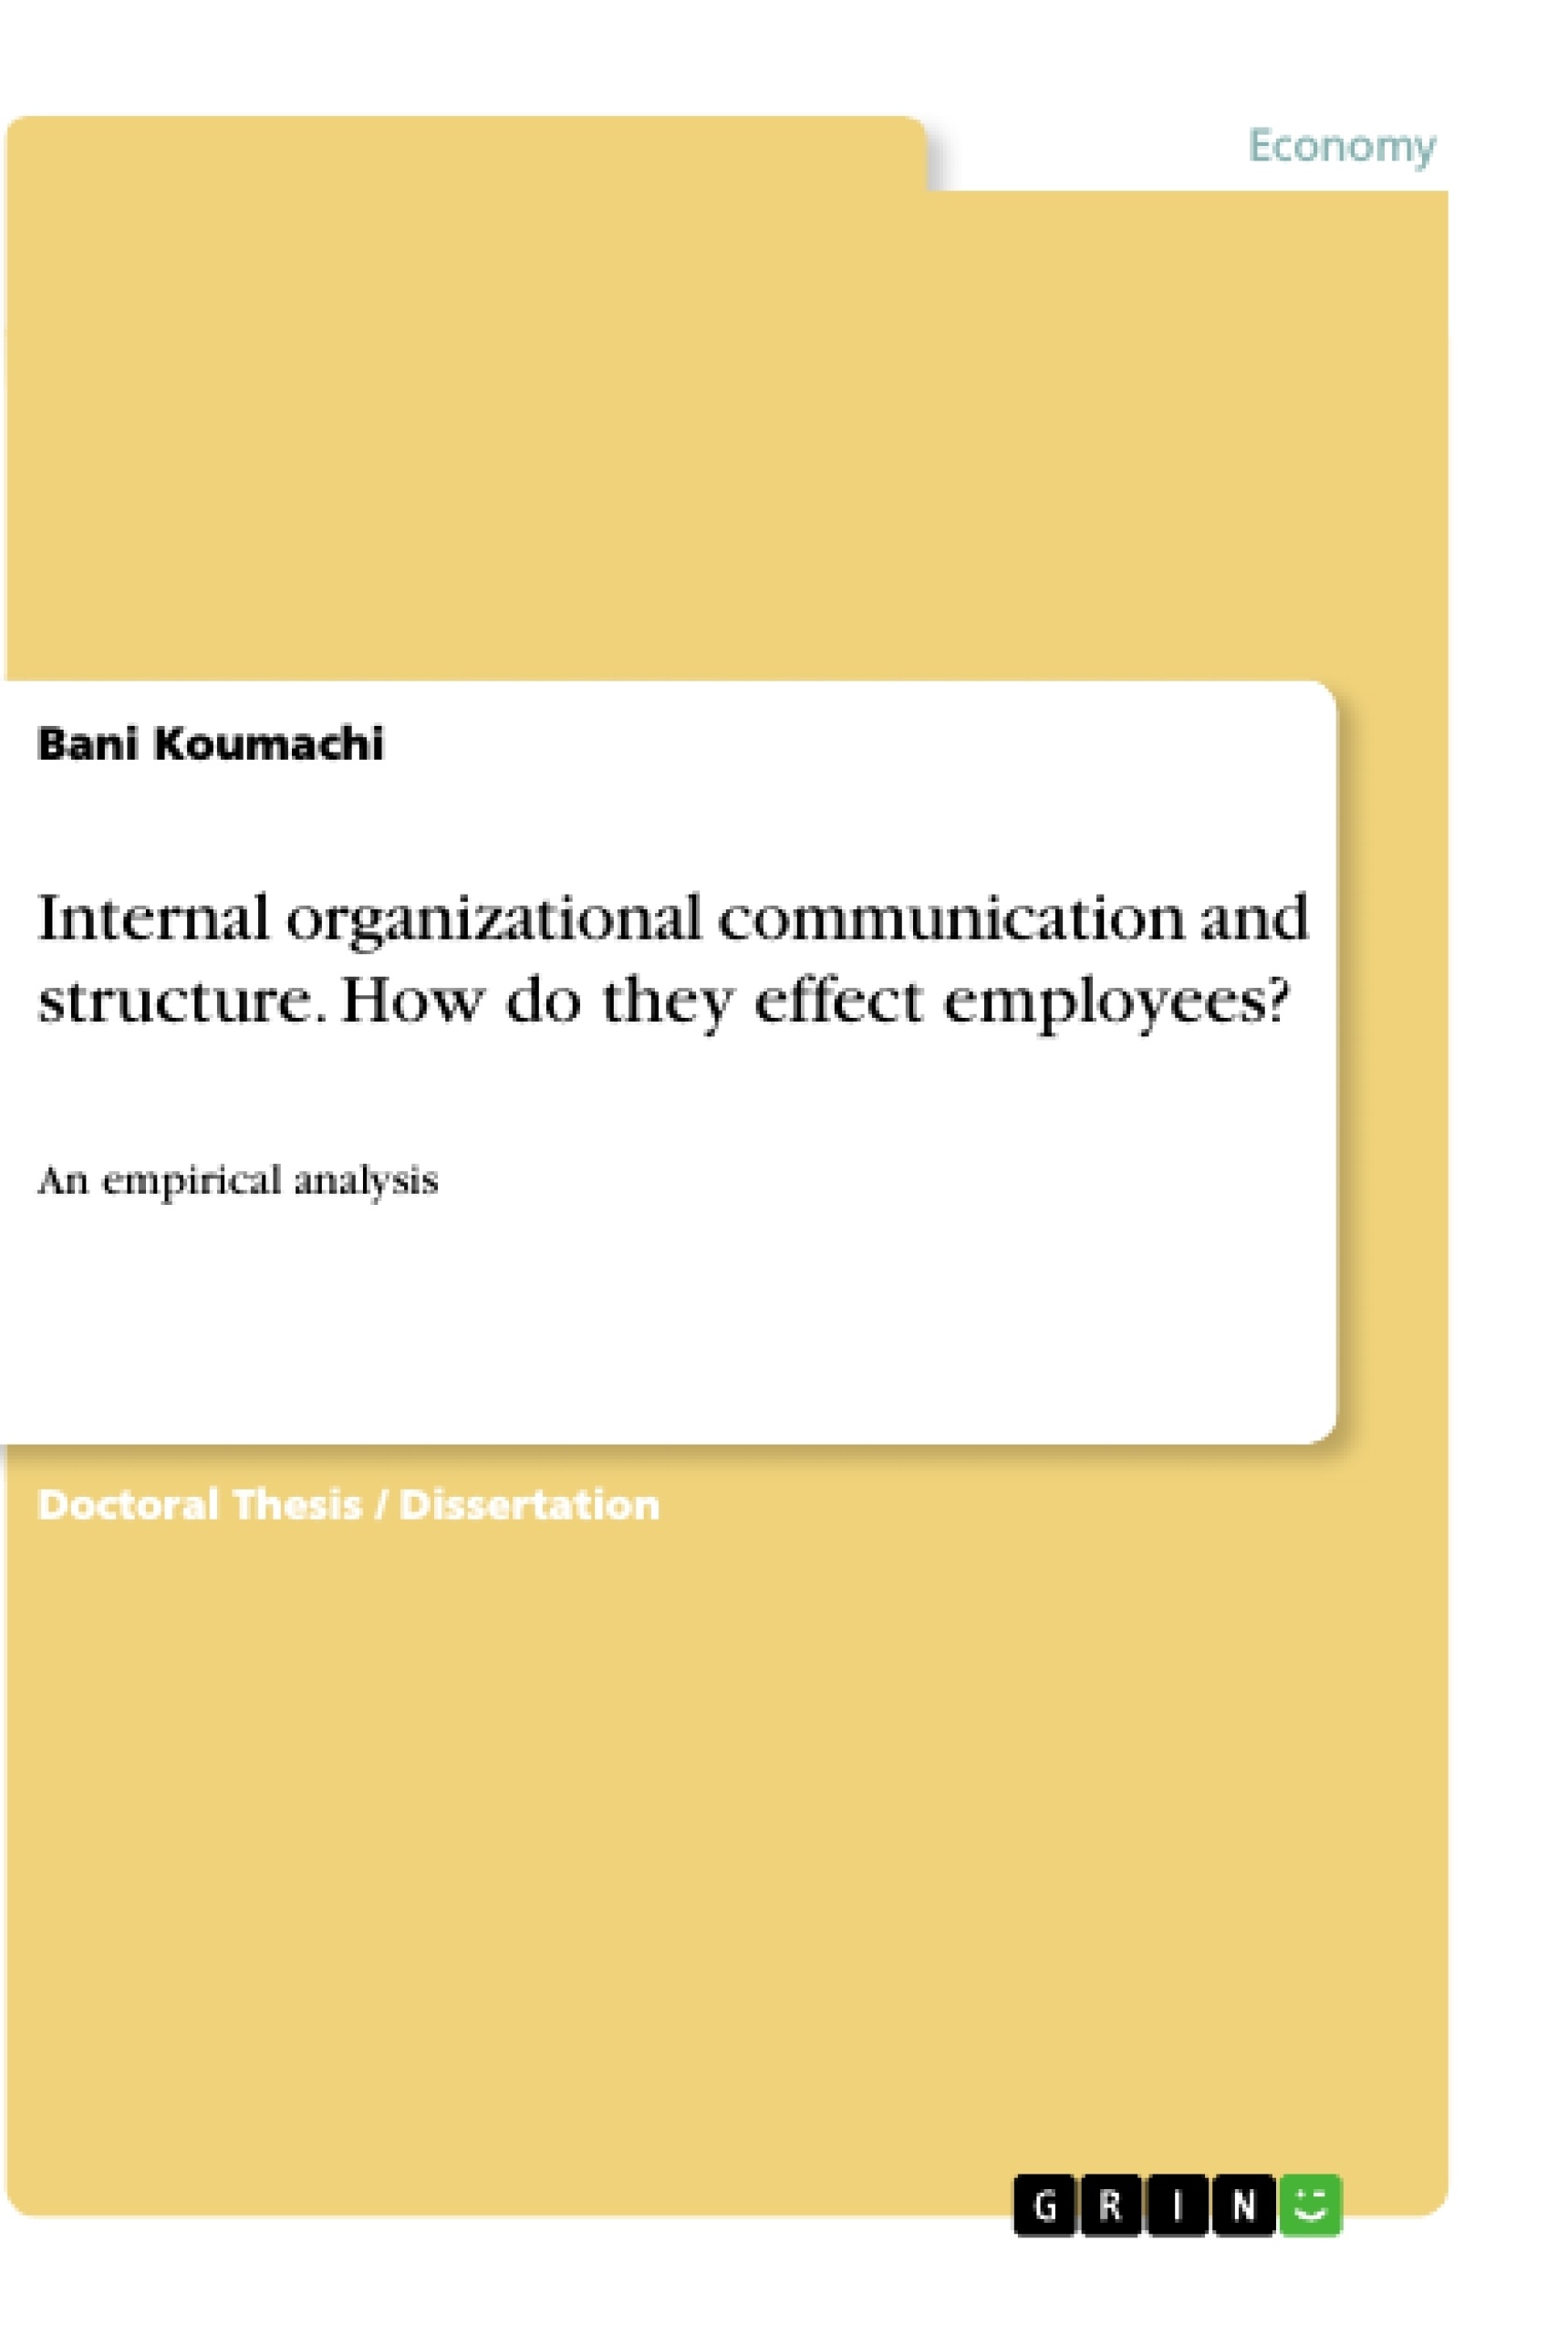 Titel: Internal organizational communication and structure. How do they effect employees?